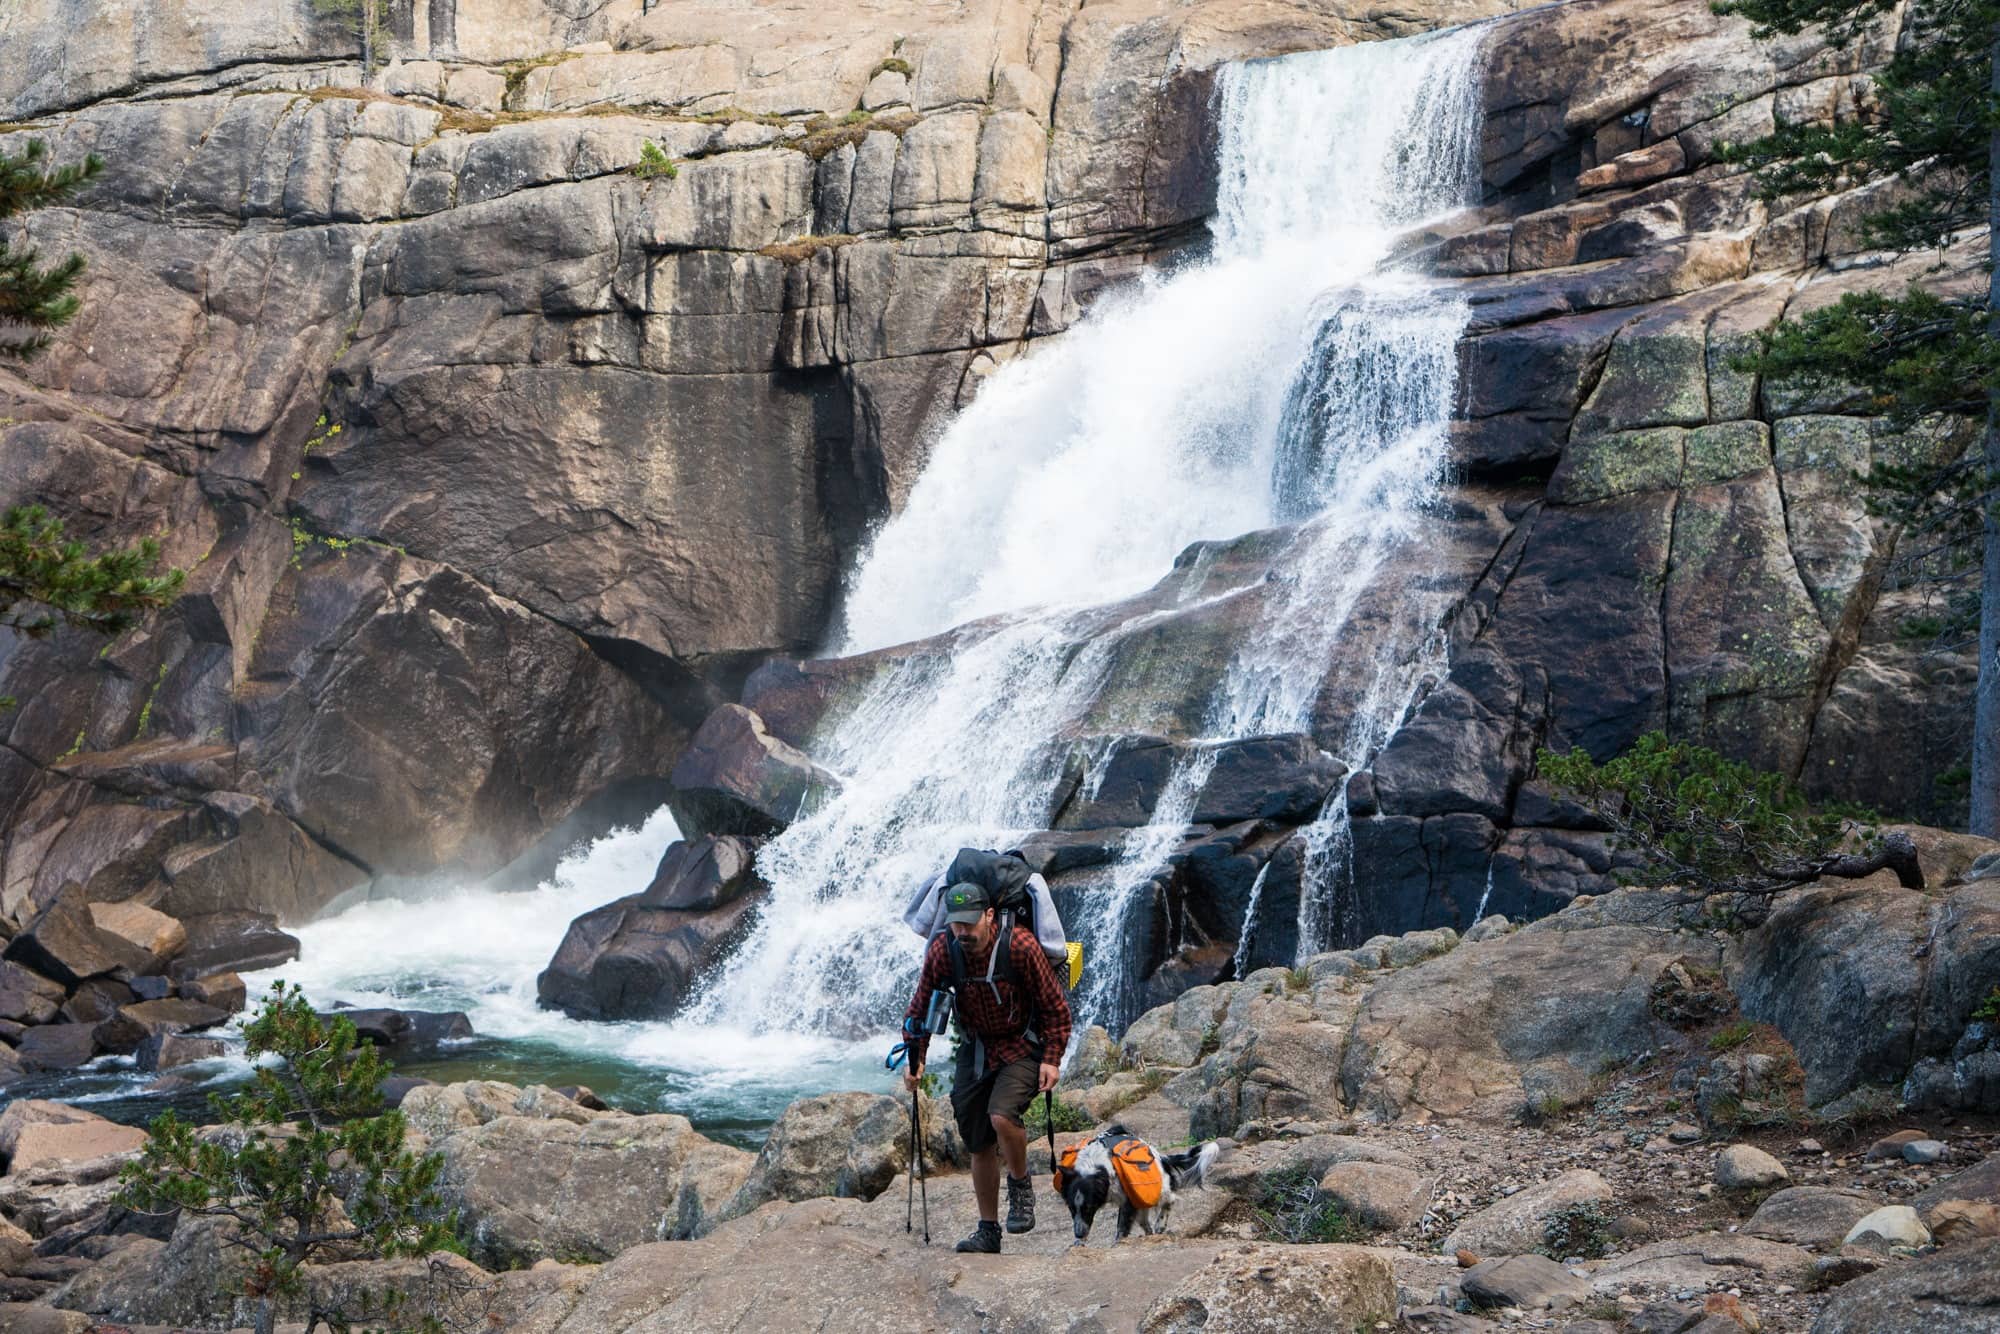 A man backpacking with a dog next to a waterfall